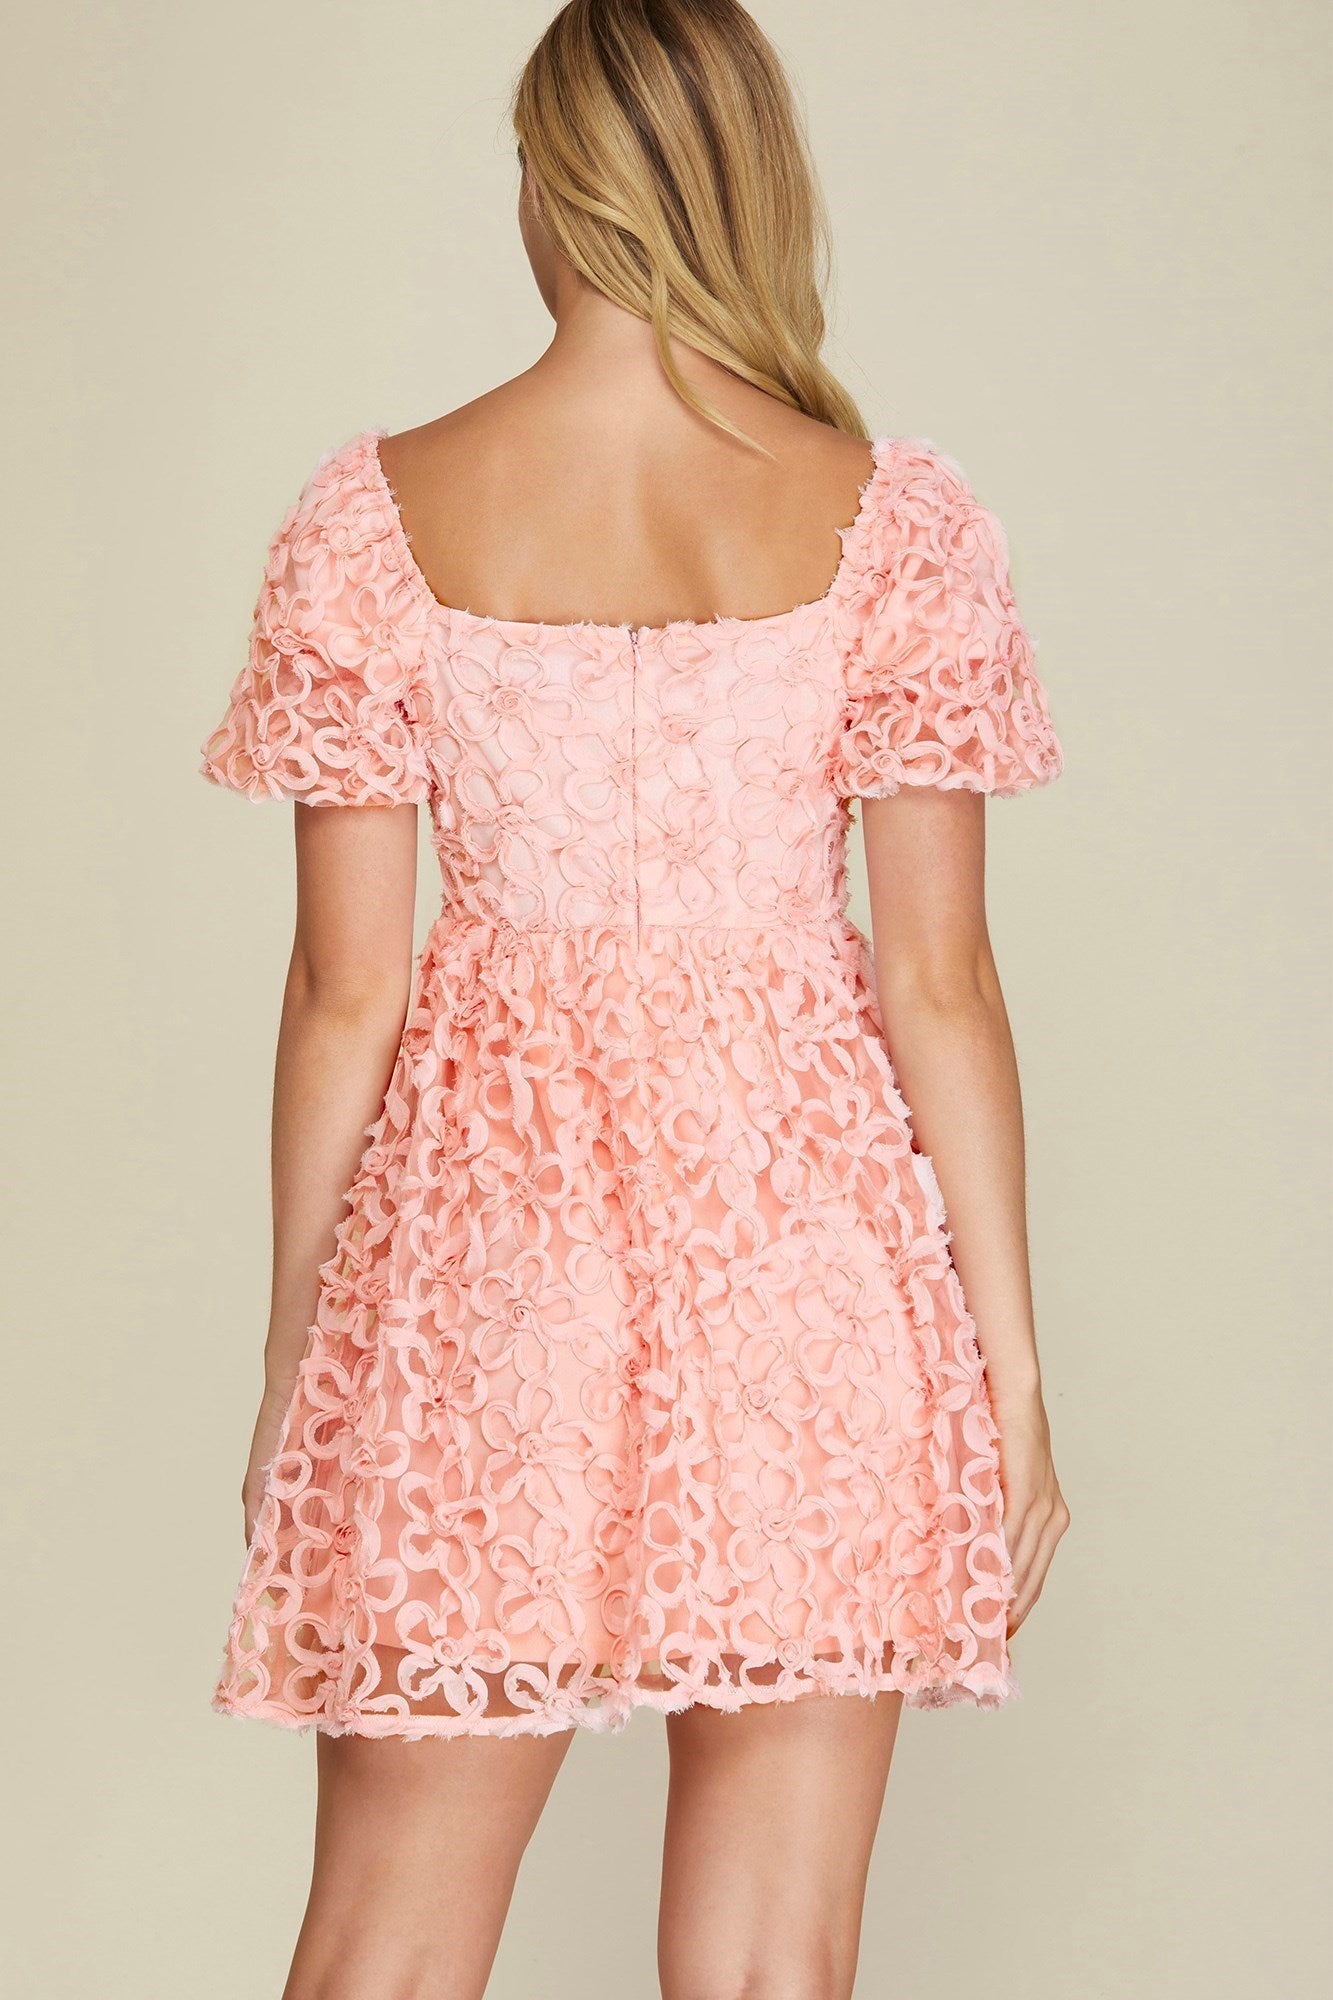 Puff Sleeve 3D Flower Lace Mini Easter Dress by She & Sky Collection